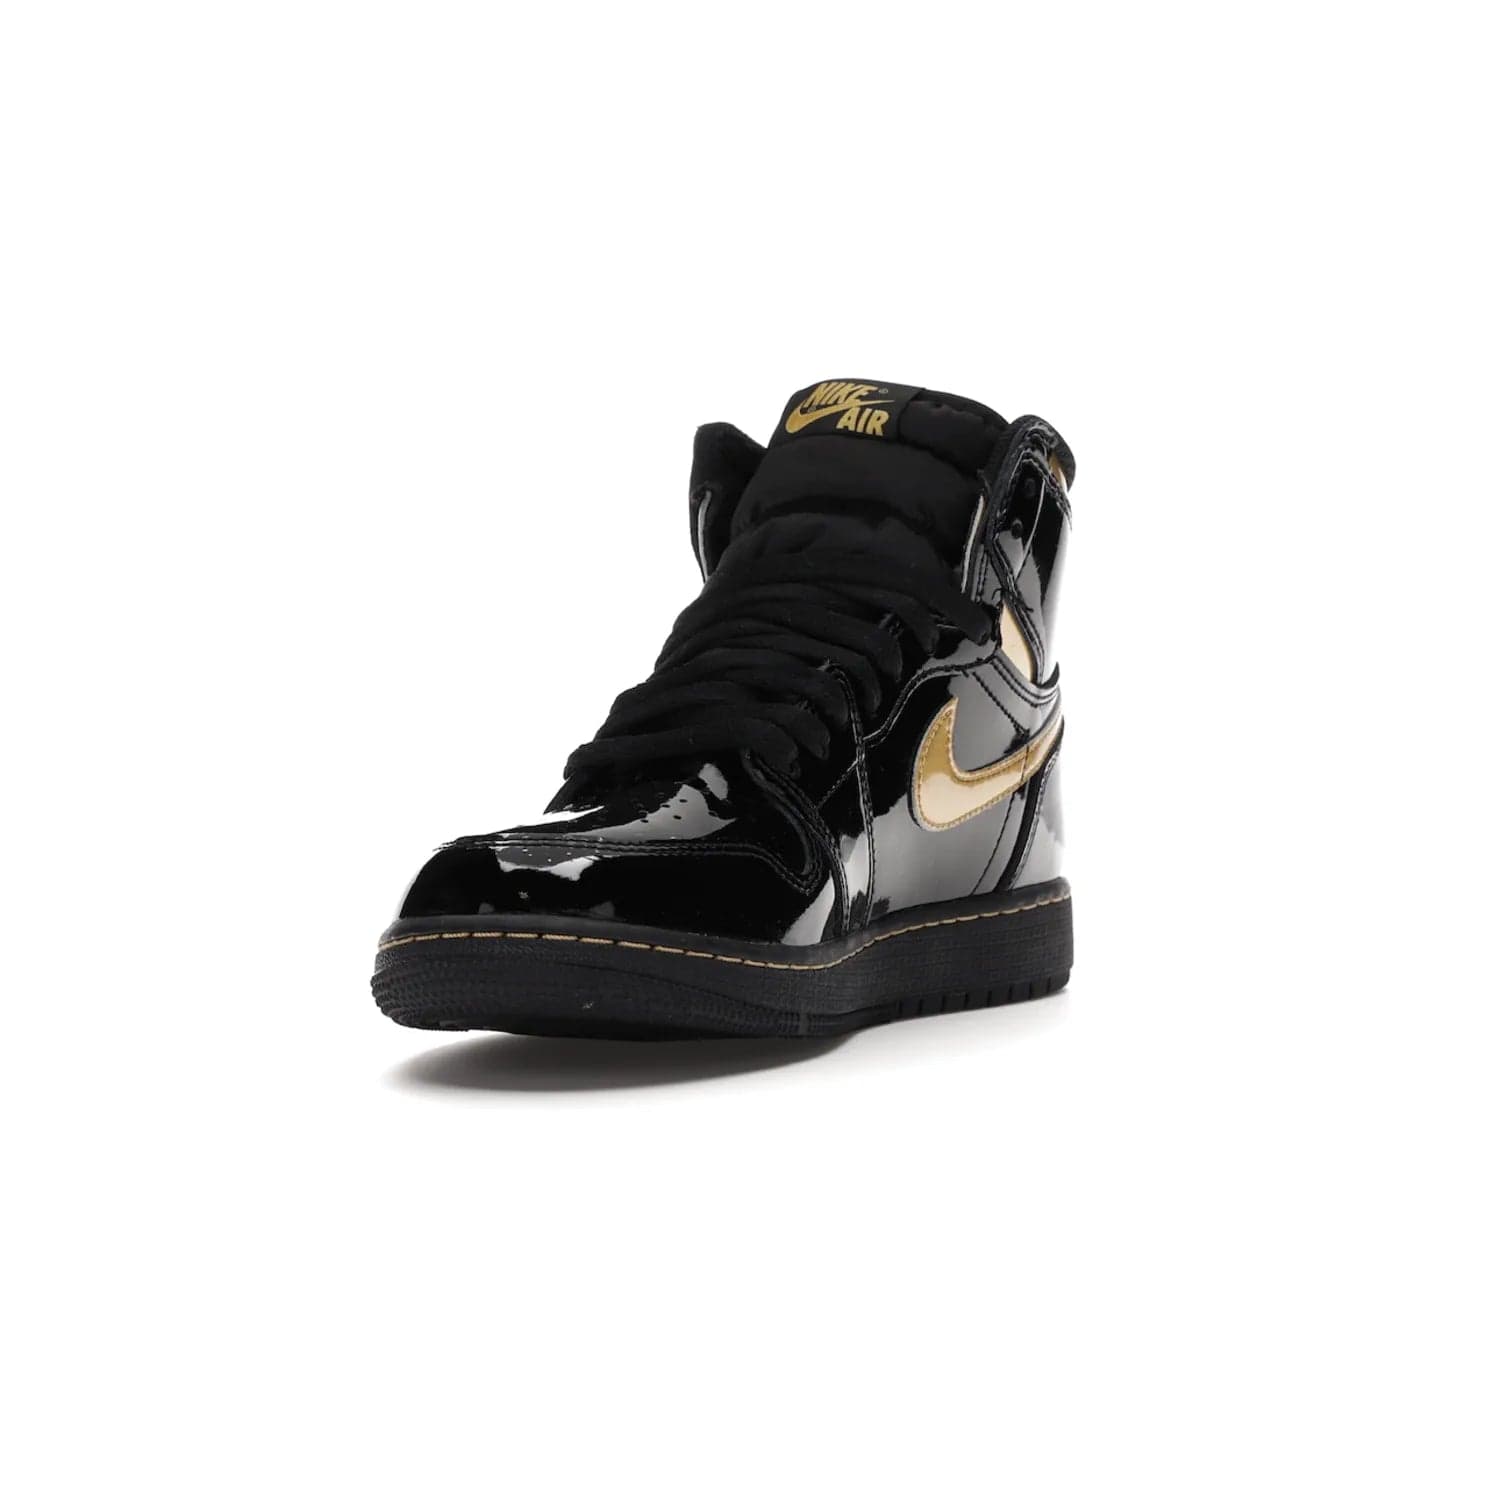 Jordan 1 Retro High Black Metallic Gold (2020) (GS) - Image 13 - Only at www.BallersClubKickz.com - Shop the Kids Air Jordan 1 Retro High in Black Metallic Gold for a stylish and comfortable sneaker kids can love. Featuring black and metallic gold patent leather uppers, metallic gold accents, and an Air sole unit for extra cushioning.